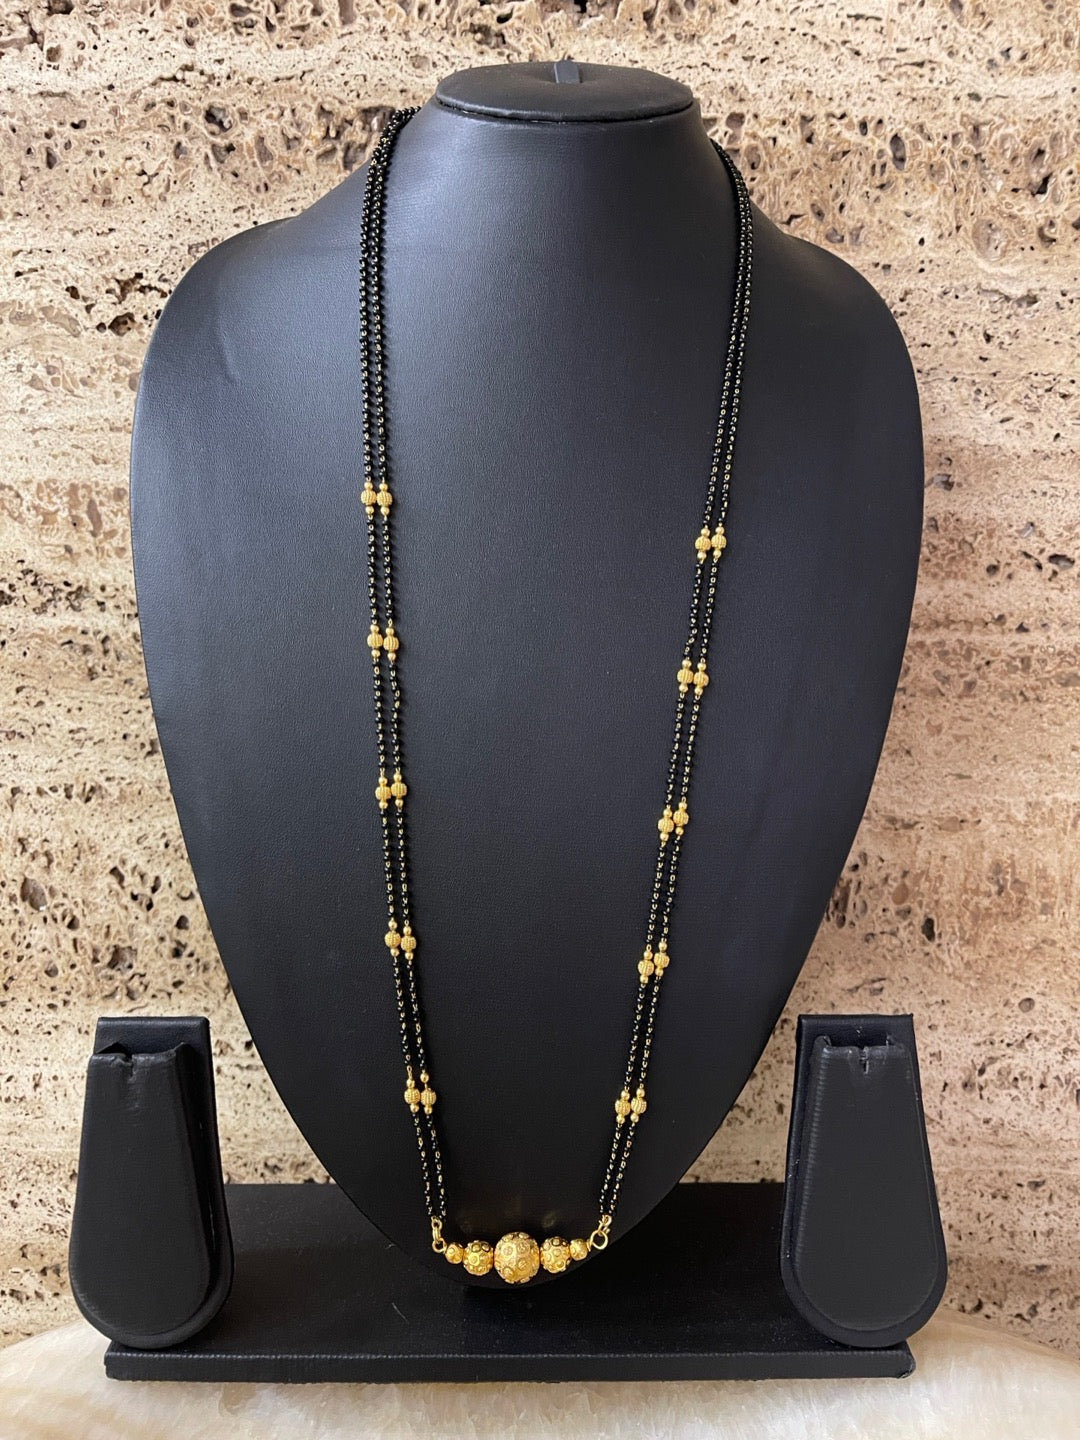 image for Gold Long Mangalsutra Designs With Ball Pendant In Traditional Marathi Style 2 Line Black Beads Chain